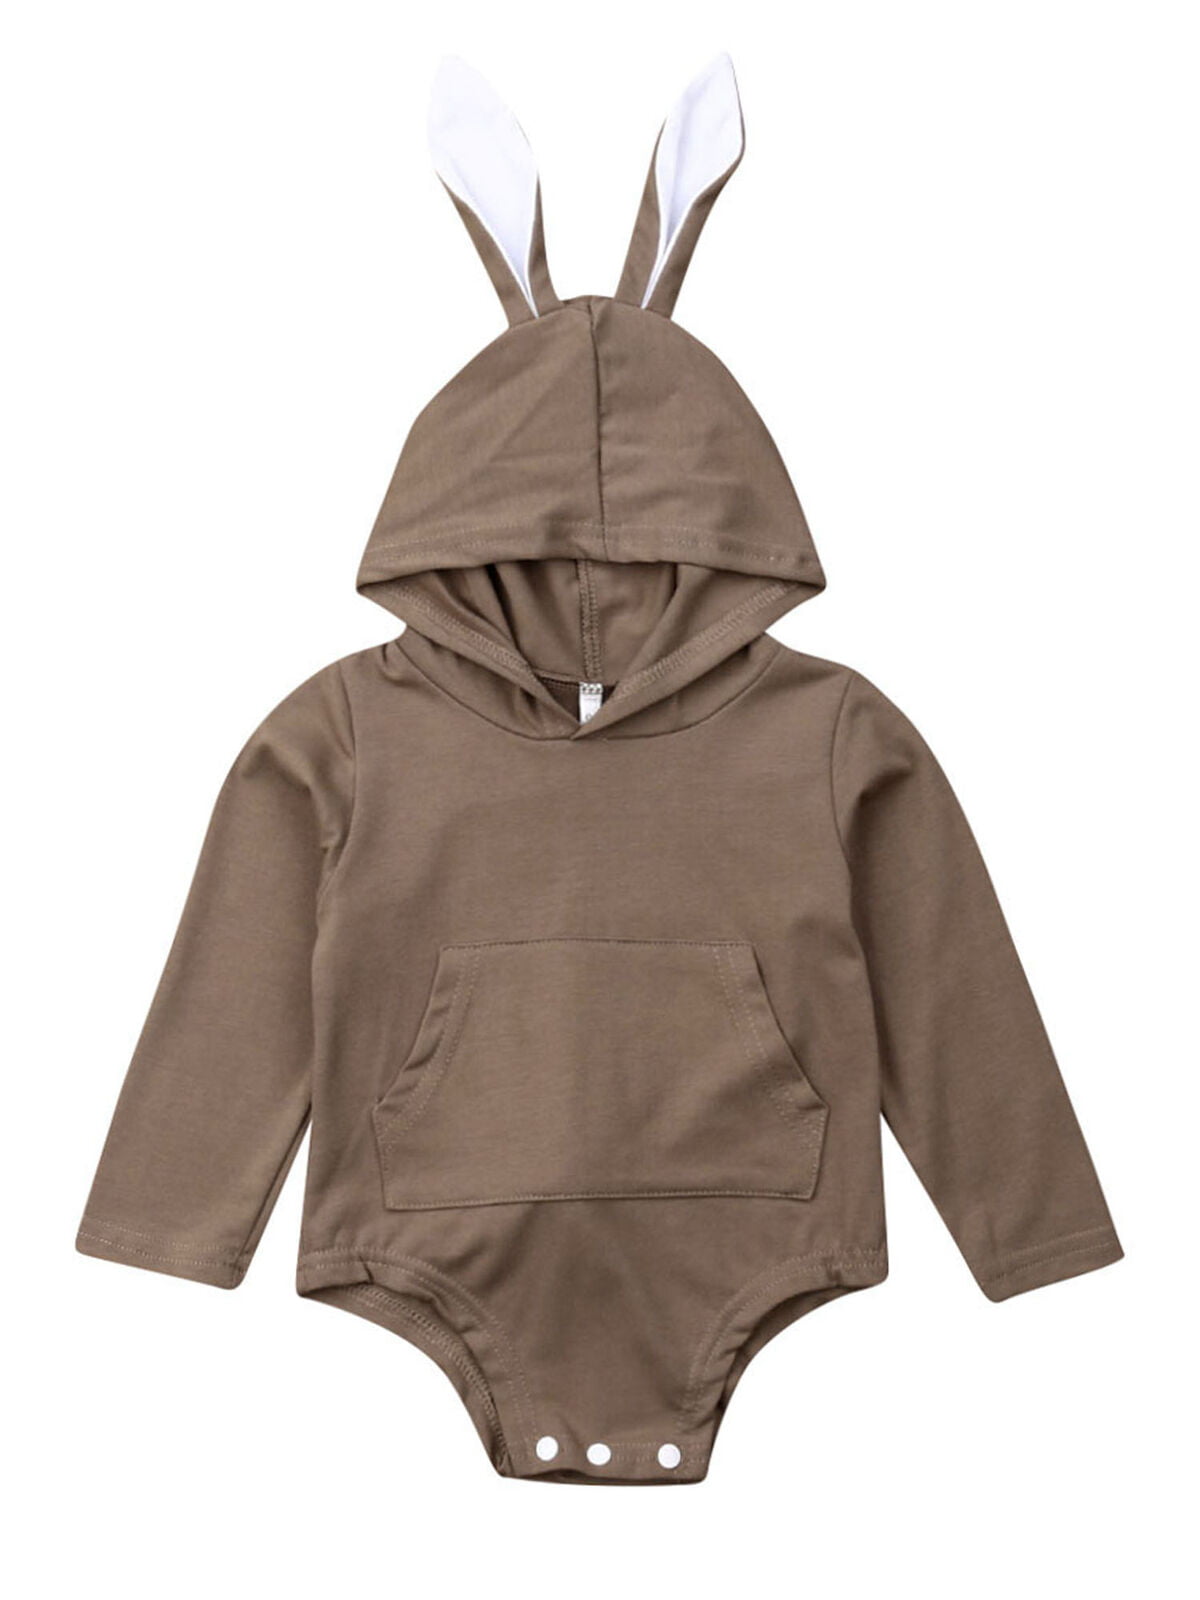 Infant Baby Boy Girl Rabbit Ears Hooded Romper Jumpsuit Outfits Bunny Clothes 